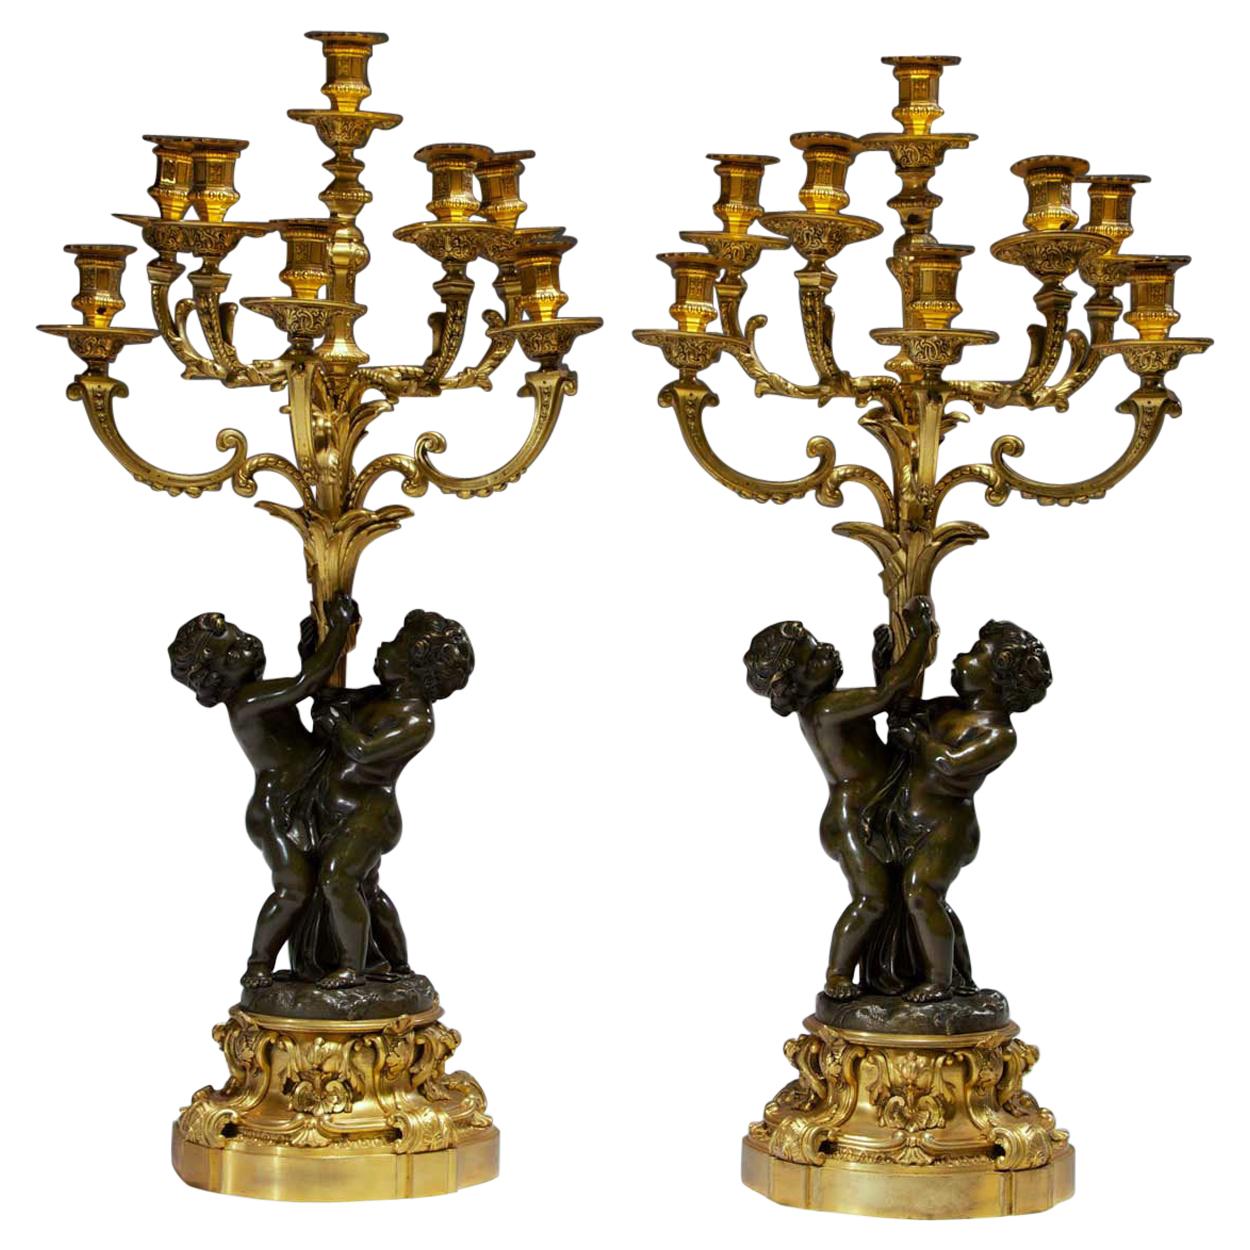 Pair of French Ormolu Eight-light Candelabras by Jean-François and Denière